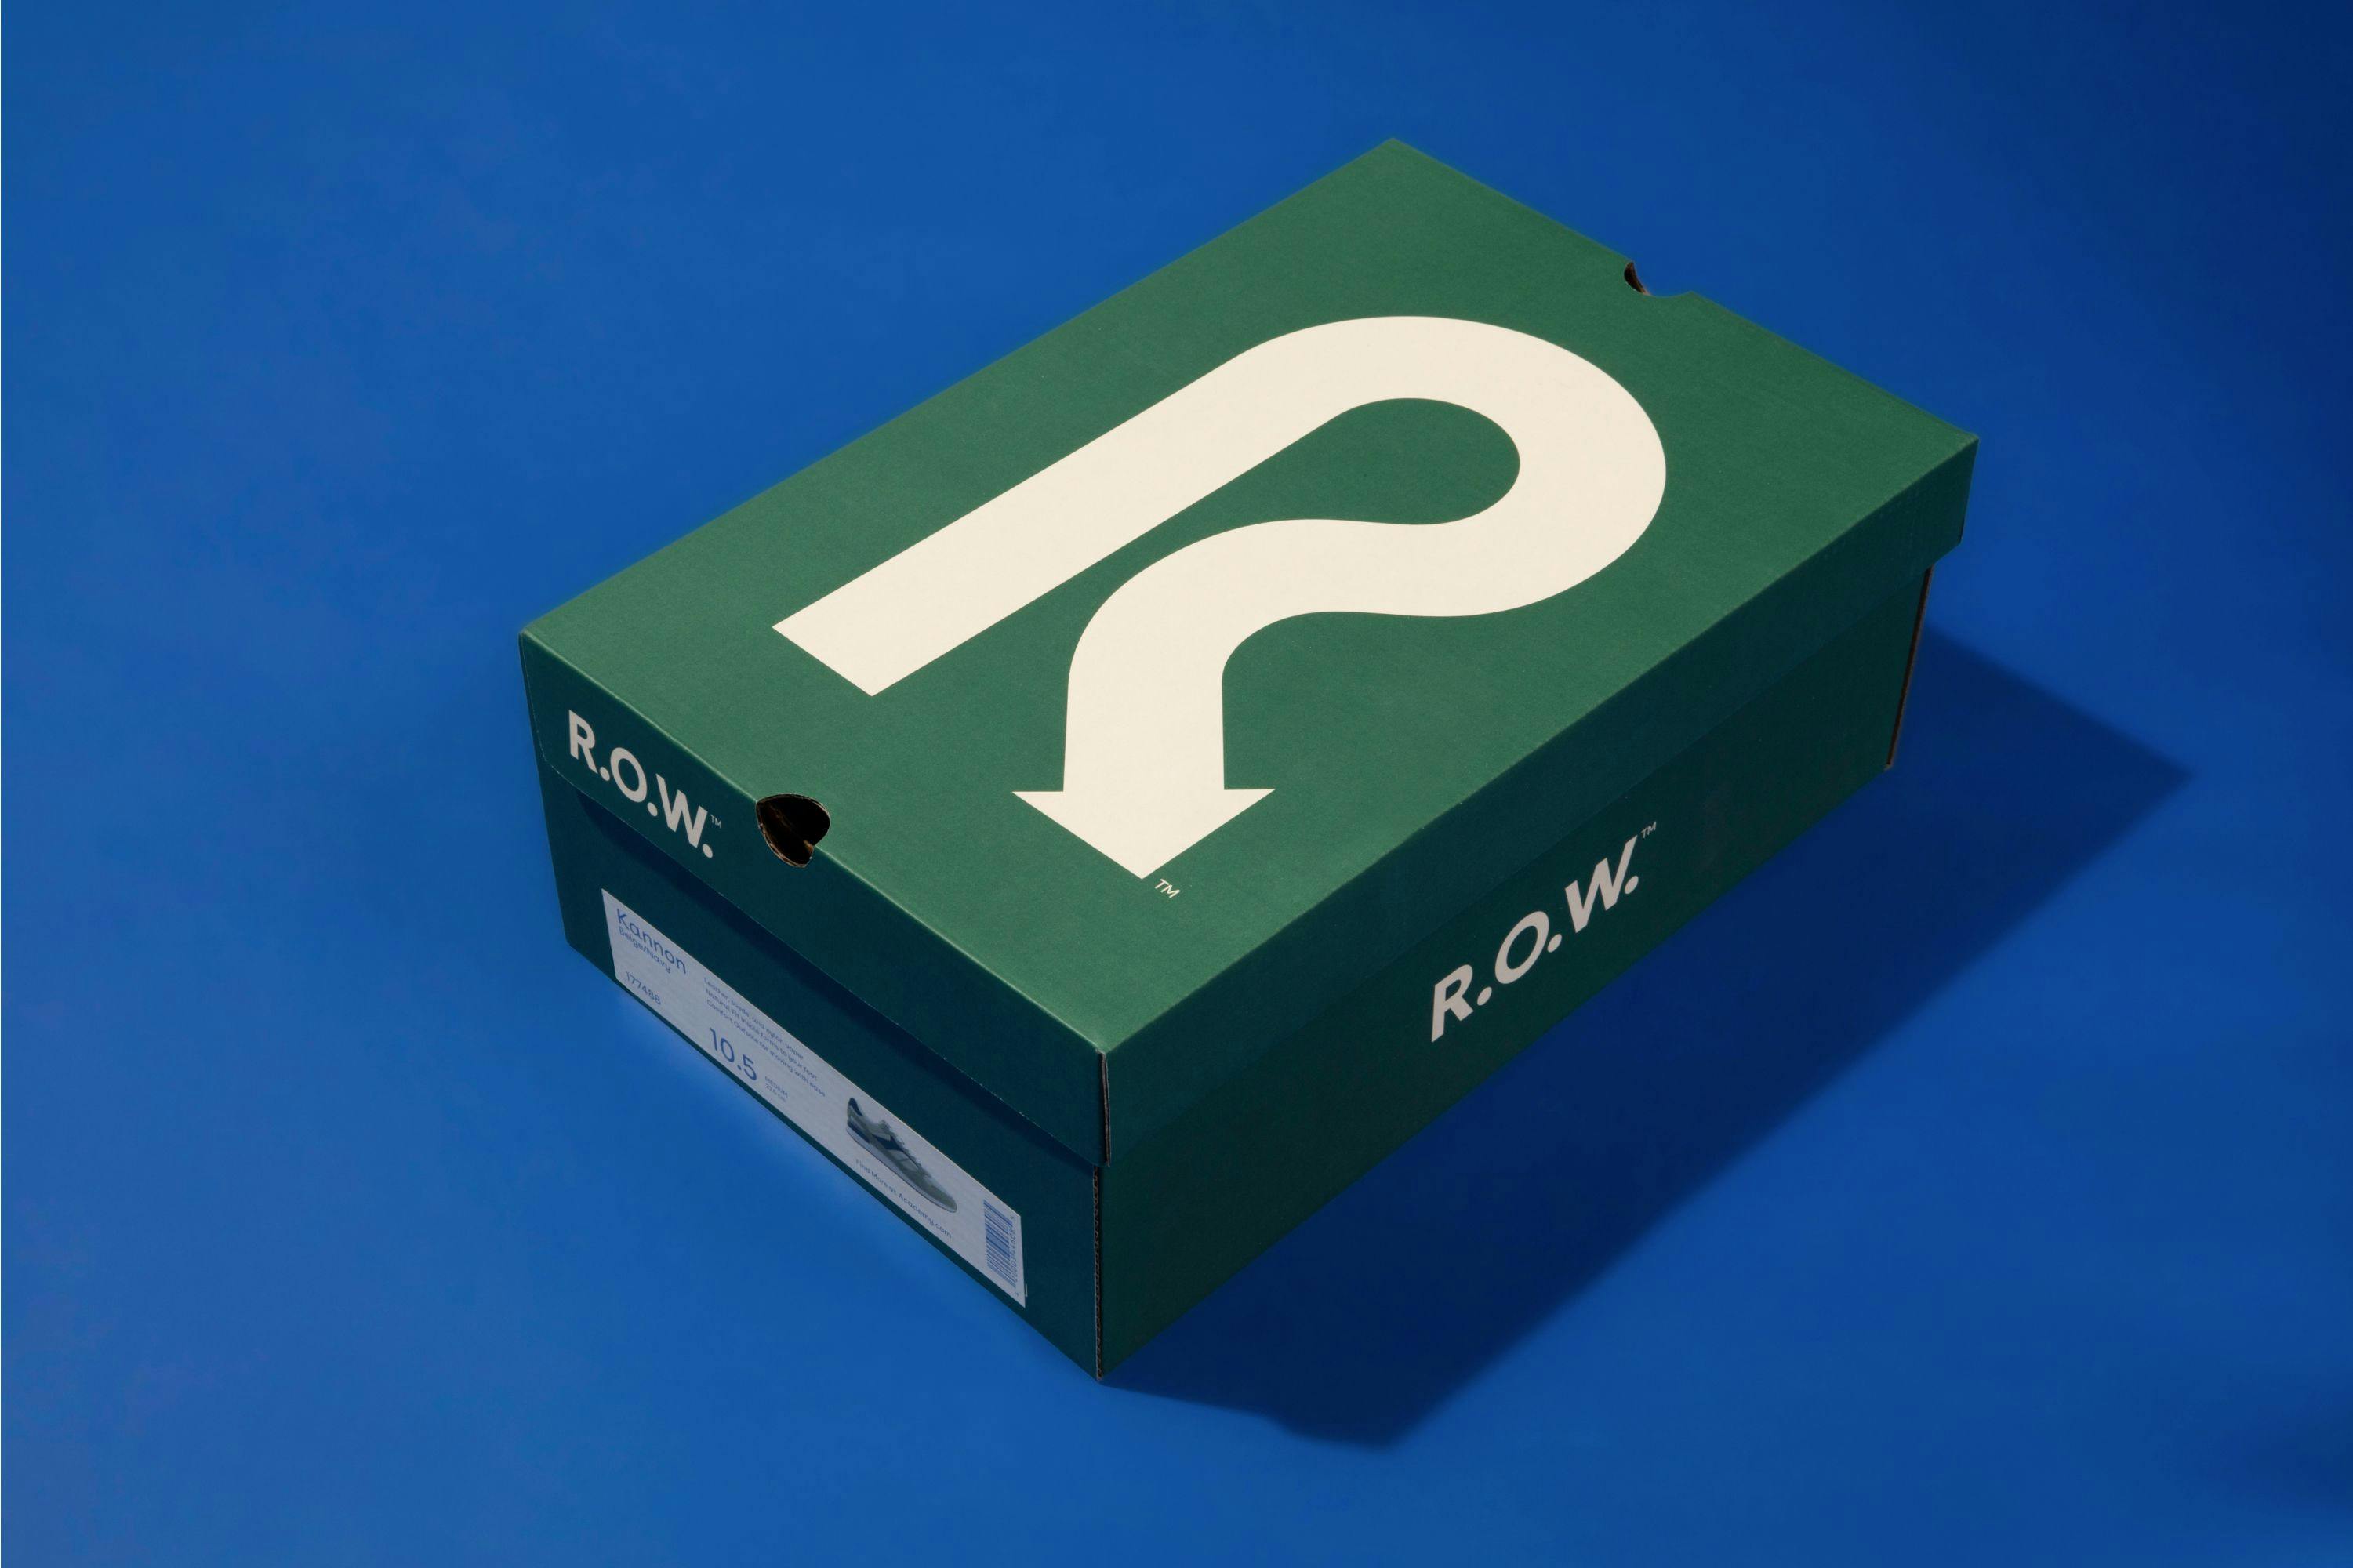 Green and white R.O.W branded shoebox